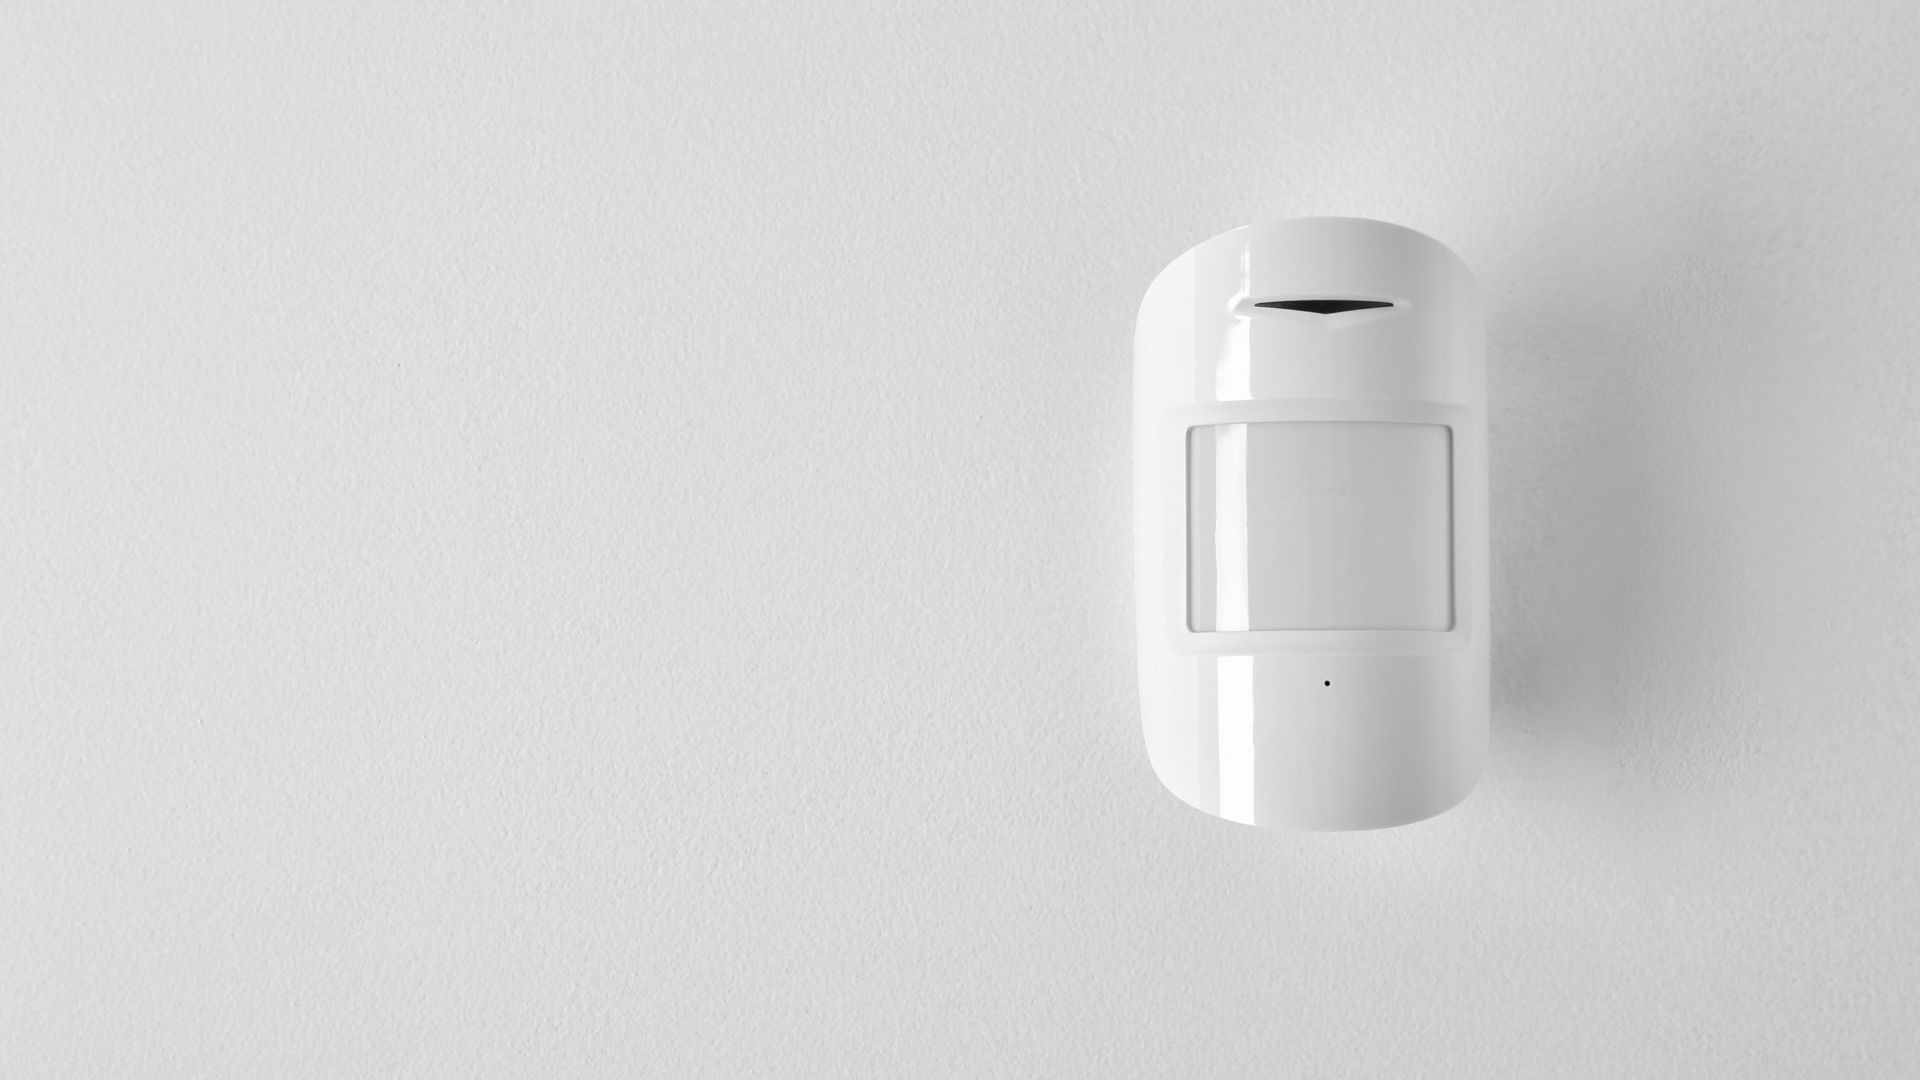 Advantages of Motion Sensing Lighting: Electrical Services for Enhanced Security and Efficiency